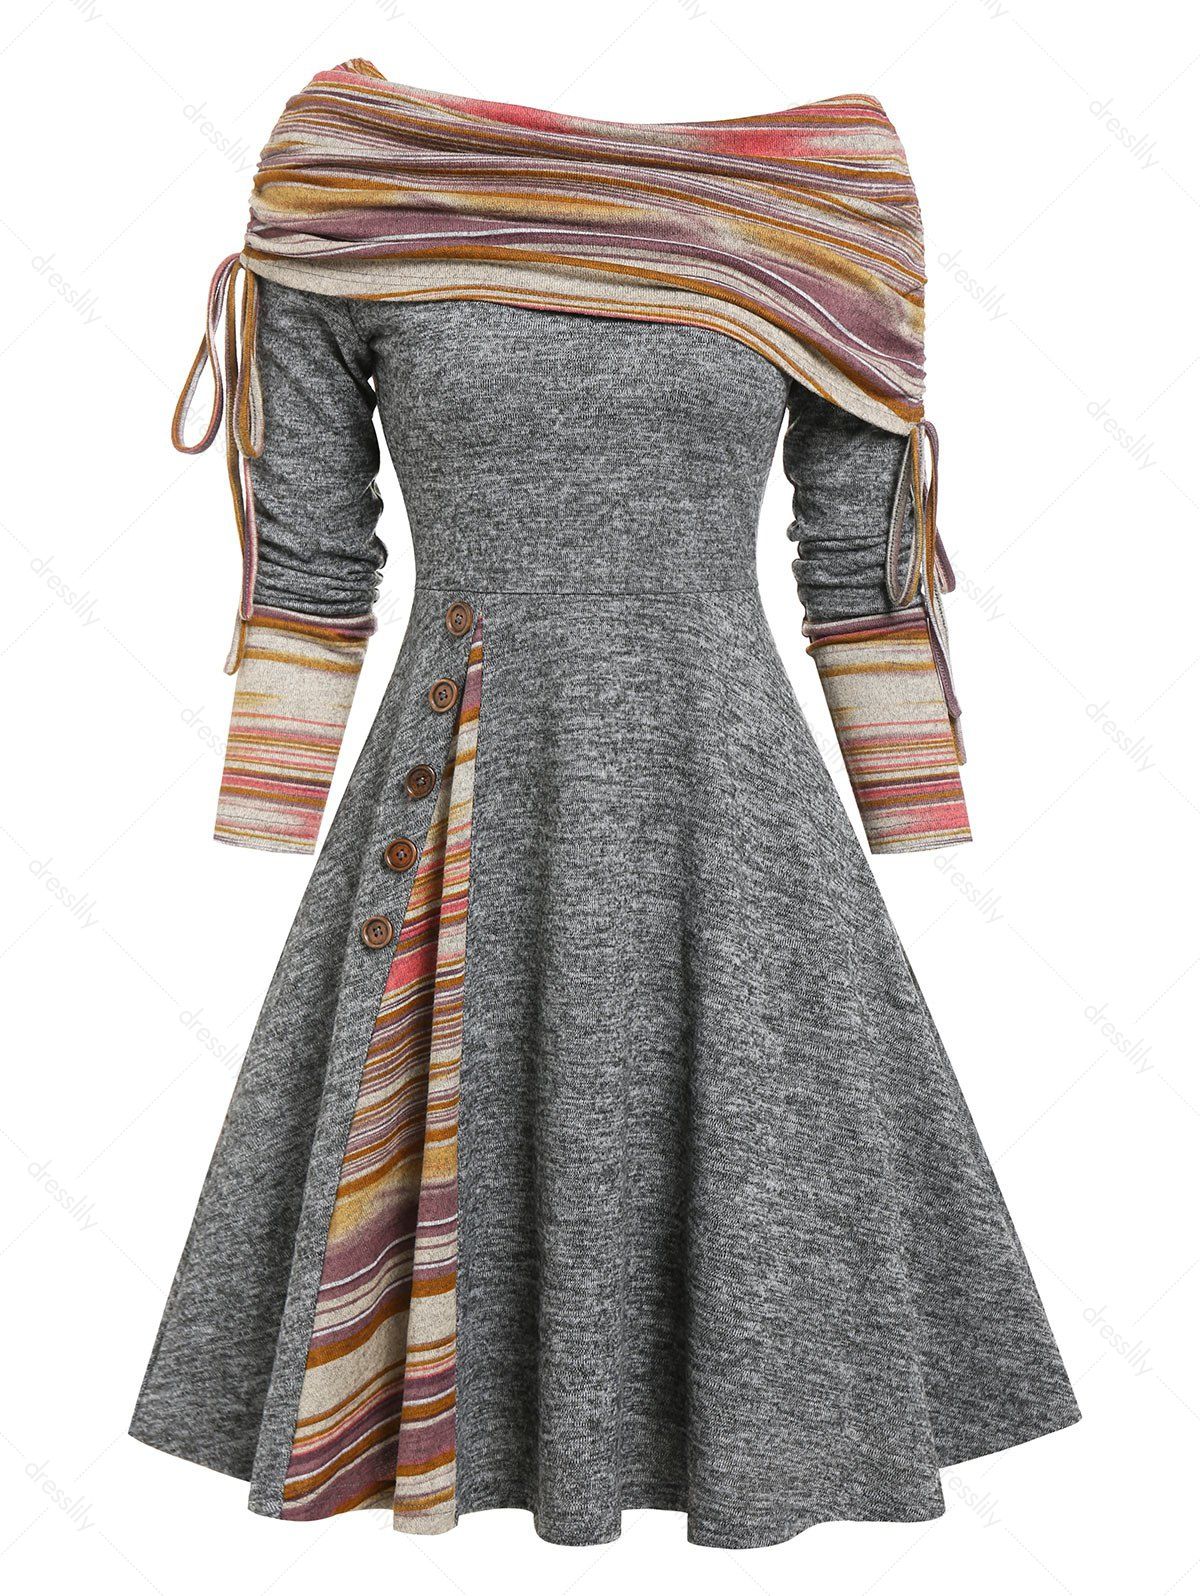 Convertible Neck Cinched Striped Flare Dress - LIGHT GRAY XL